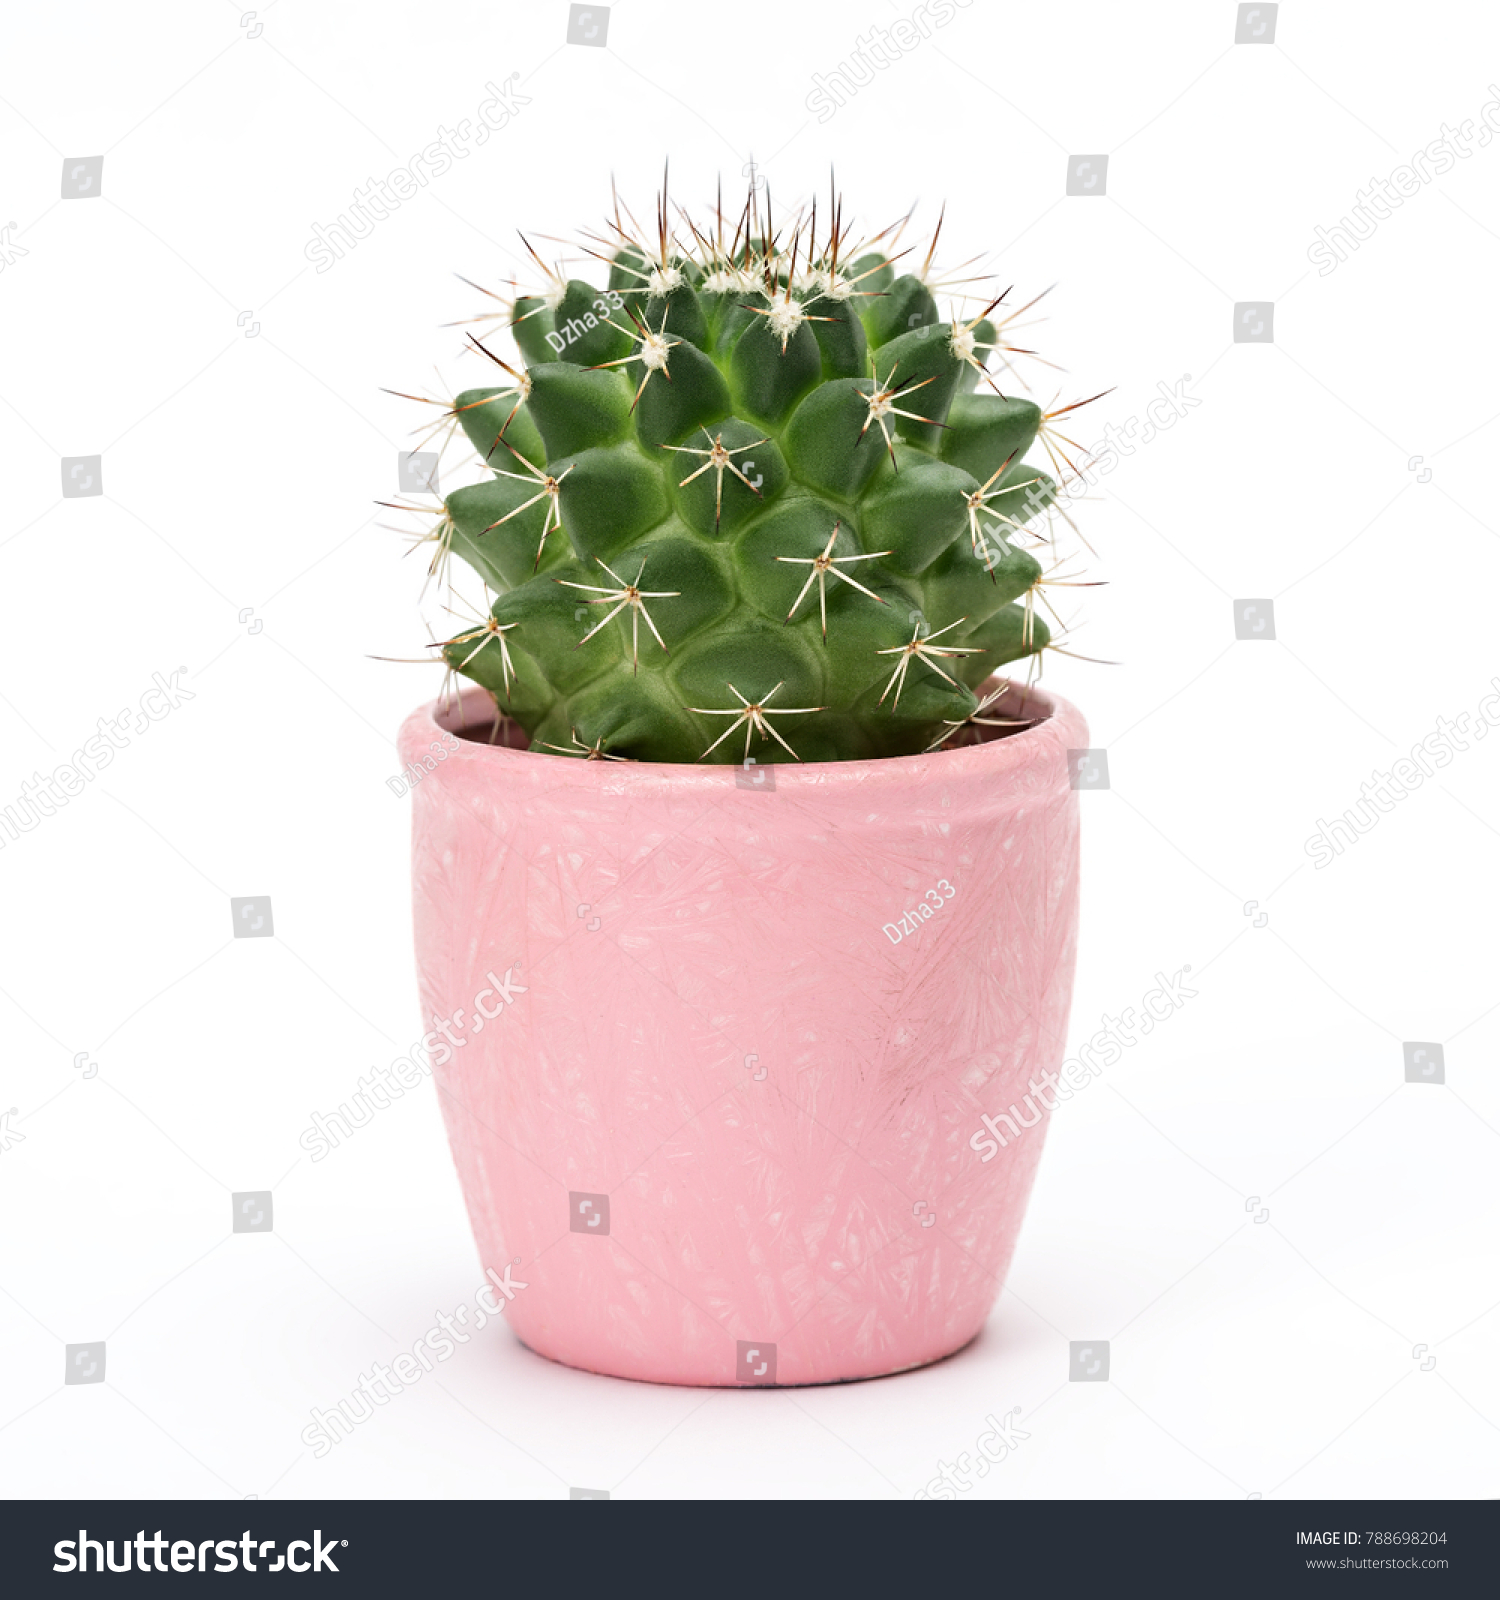 Cactus isolated on white background. Aloe and other succulents in colorful ceramic pot. #788698204